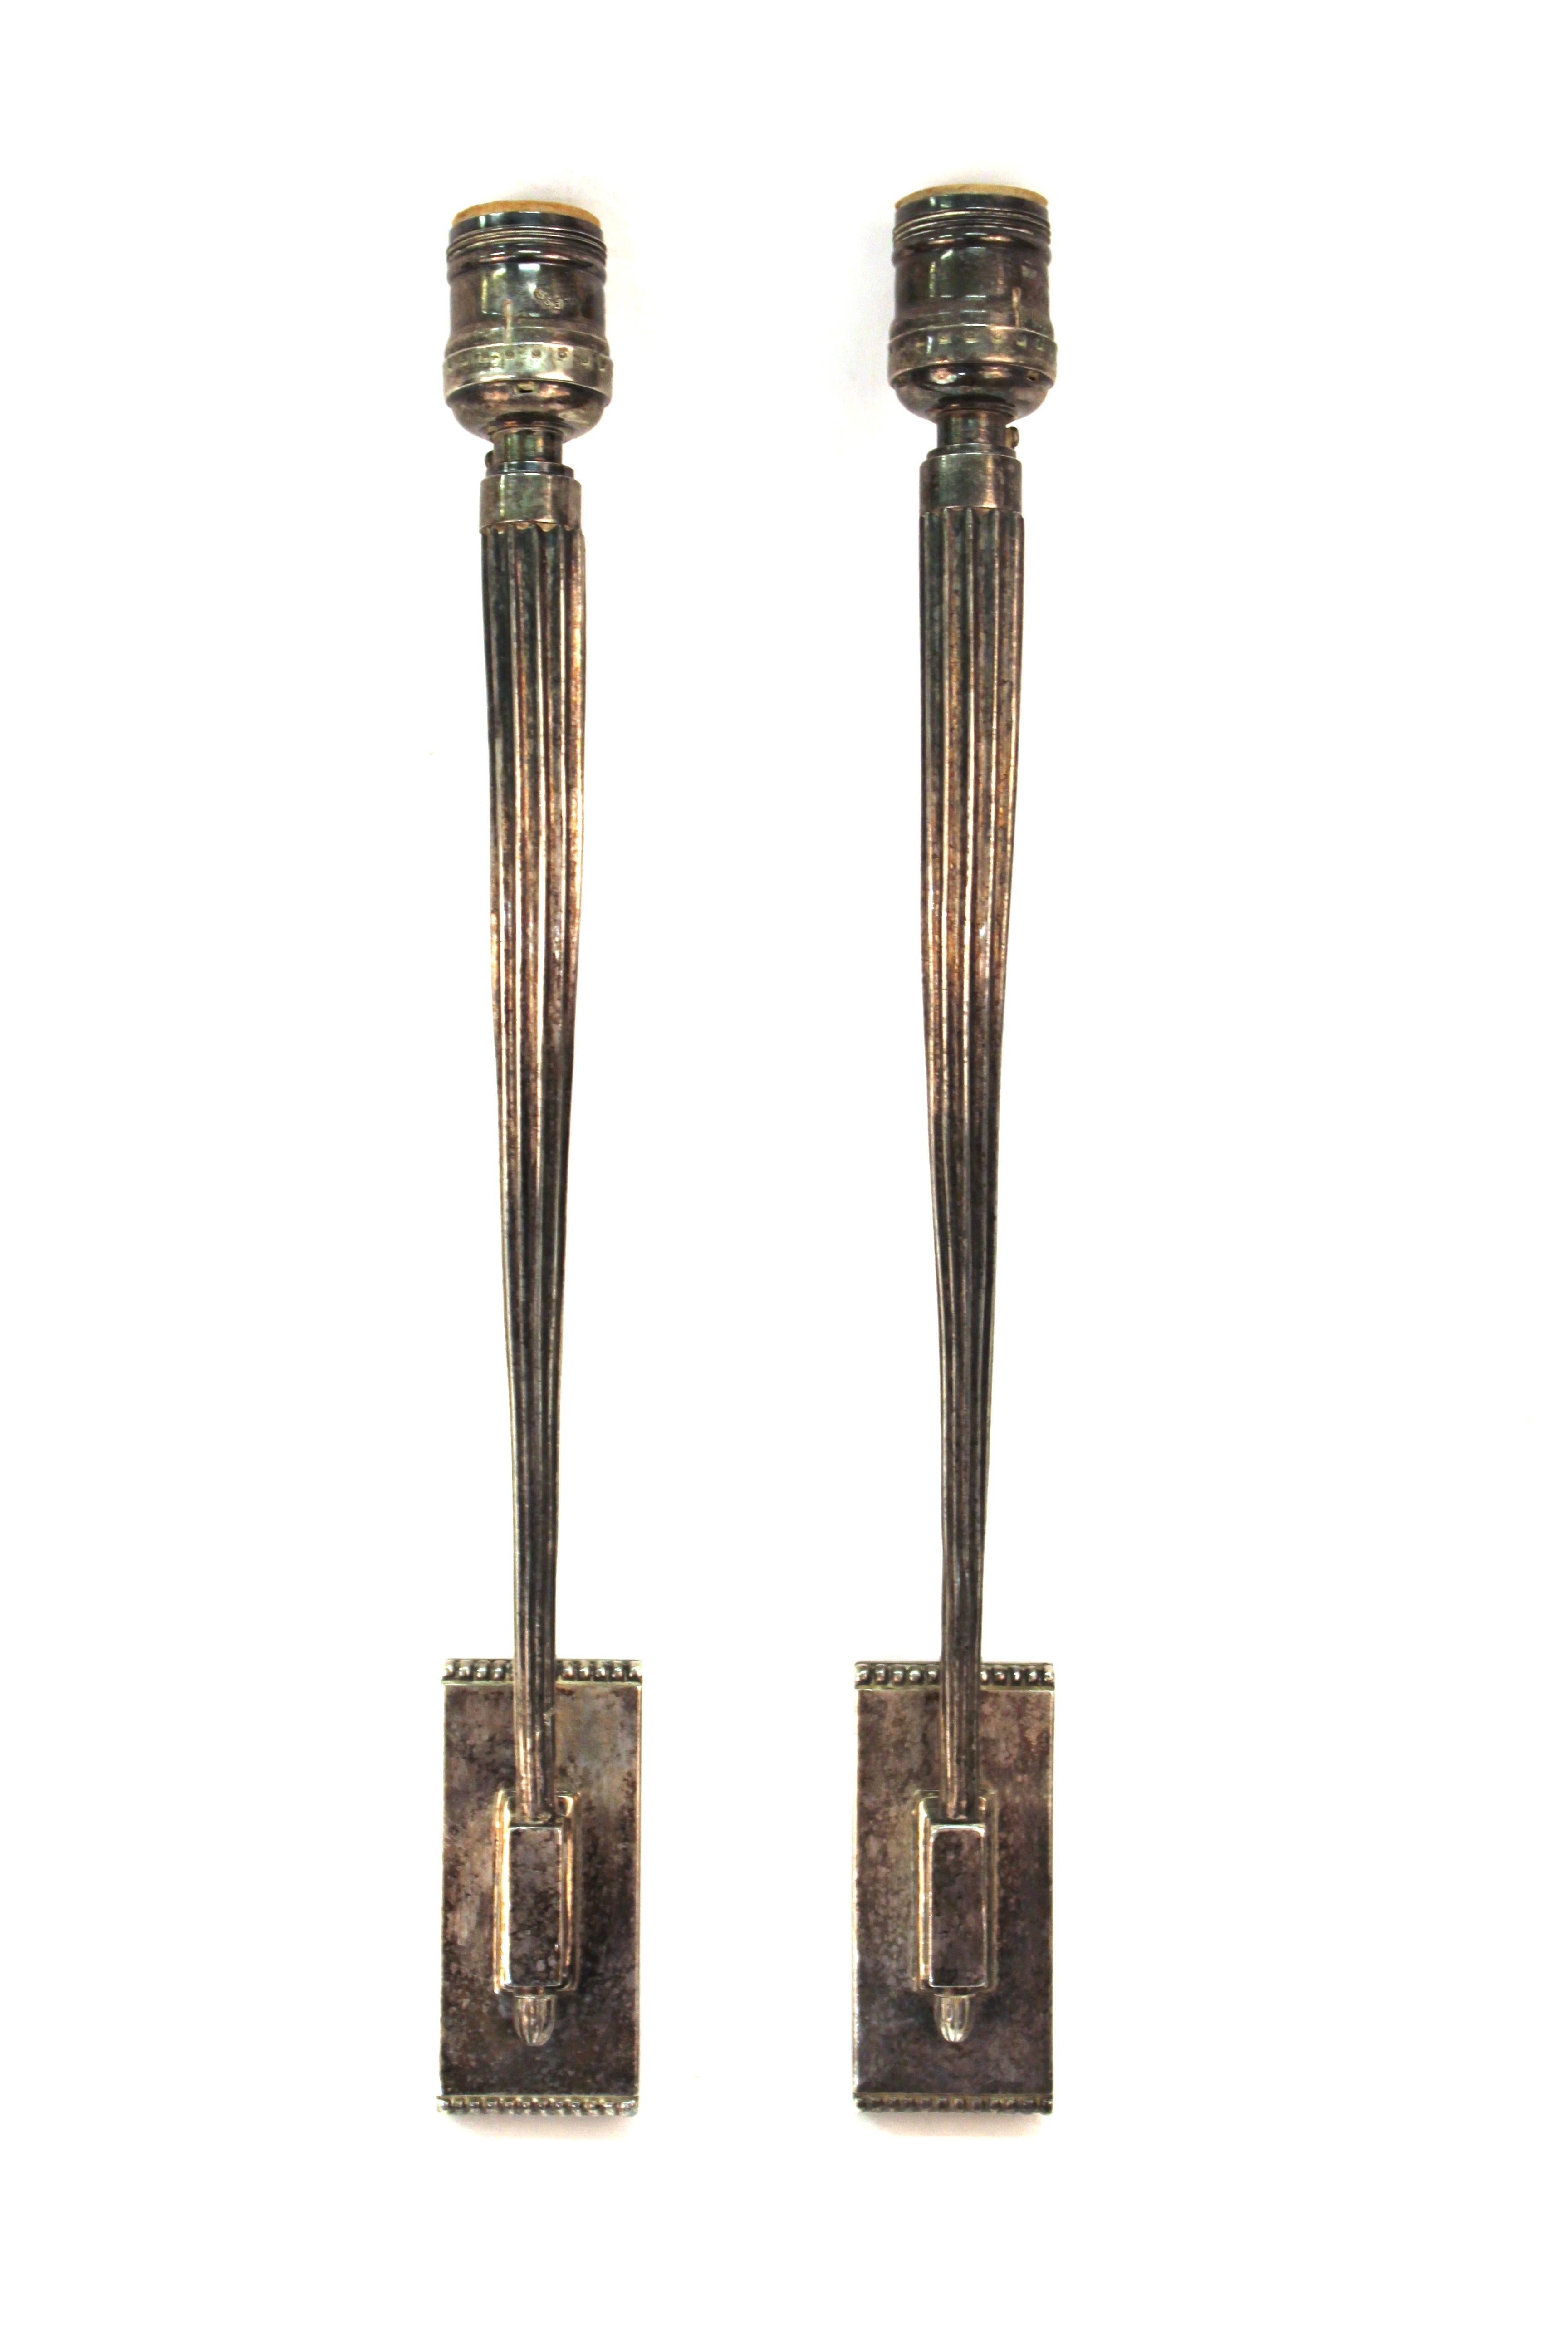 French Art Deco period pair of wall sconces in silvered bronze, attributed to Émile-Jacques Ruhlmann. The pair was likely made during the 1920s-1930s and is in great vintage condition with age-appropriate wear and patina.